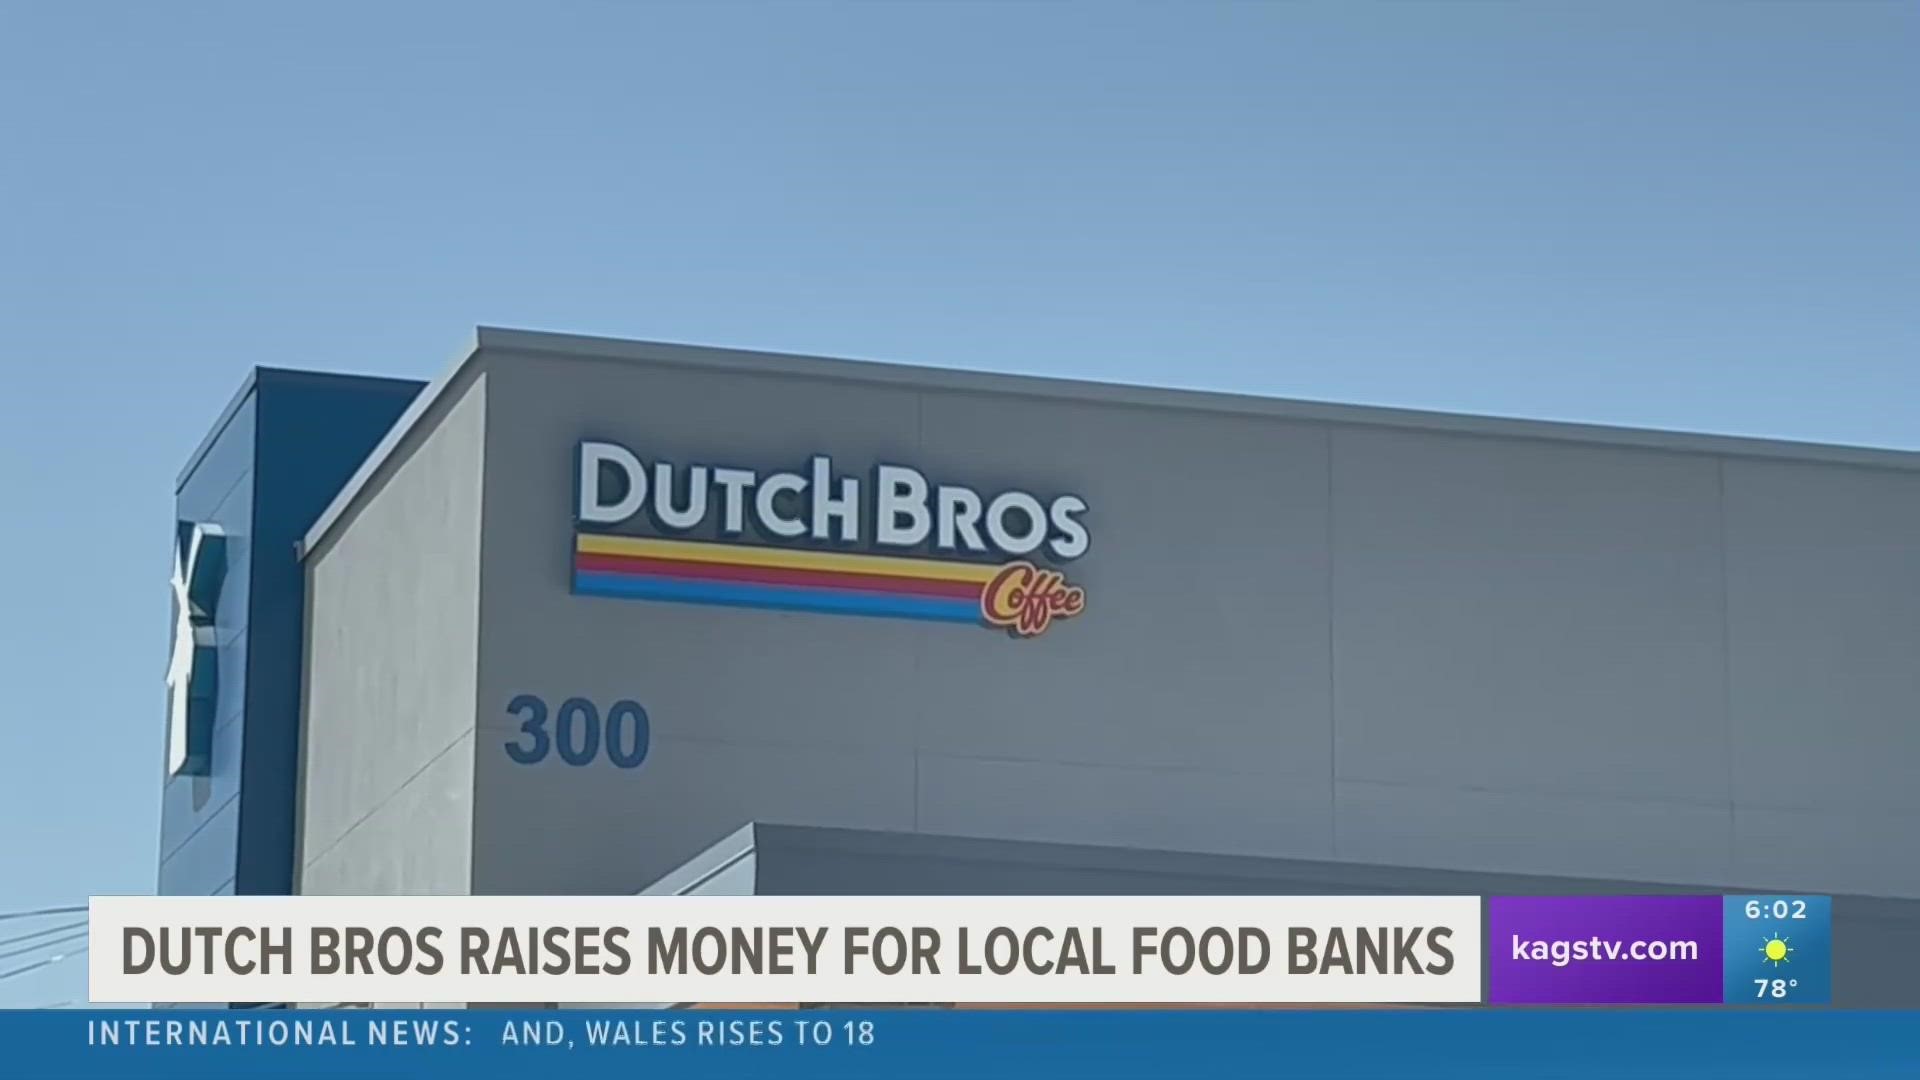 The campaign has raised over $13,000 for local food banks from Dutch Bros locations in Waco, Killeen and College Station